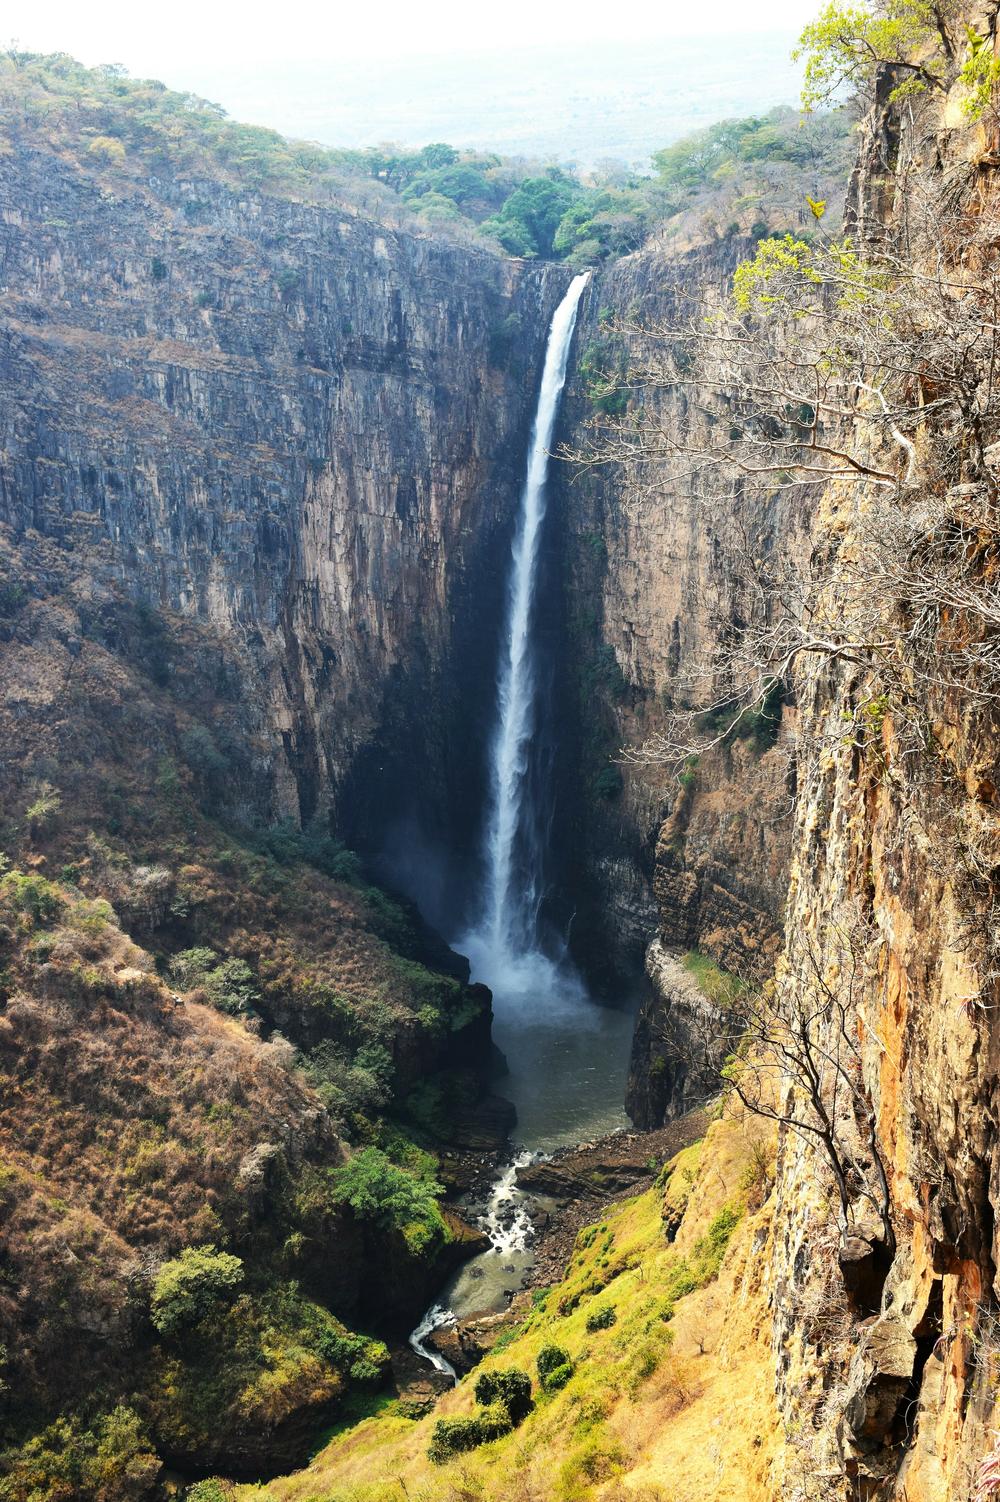 The Kalambo Falls on the Kalambo River is a 772-foot single-drop waterfall on the border of Zambia and Rukwa Region, Tanzania, near the location of the dig.